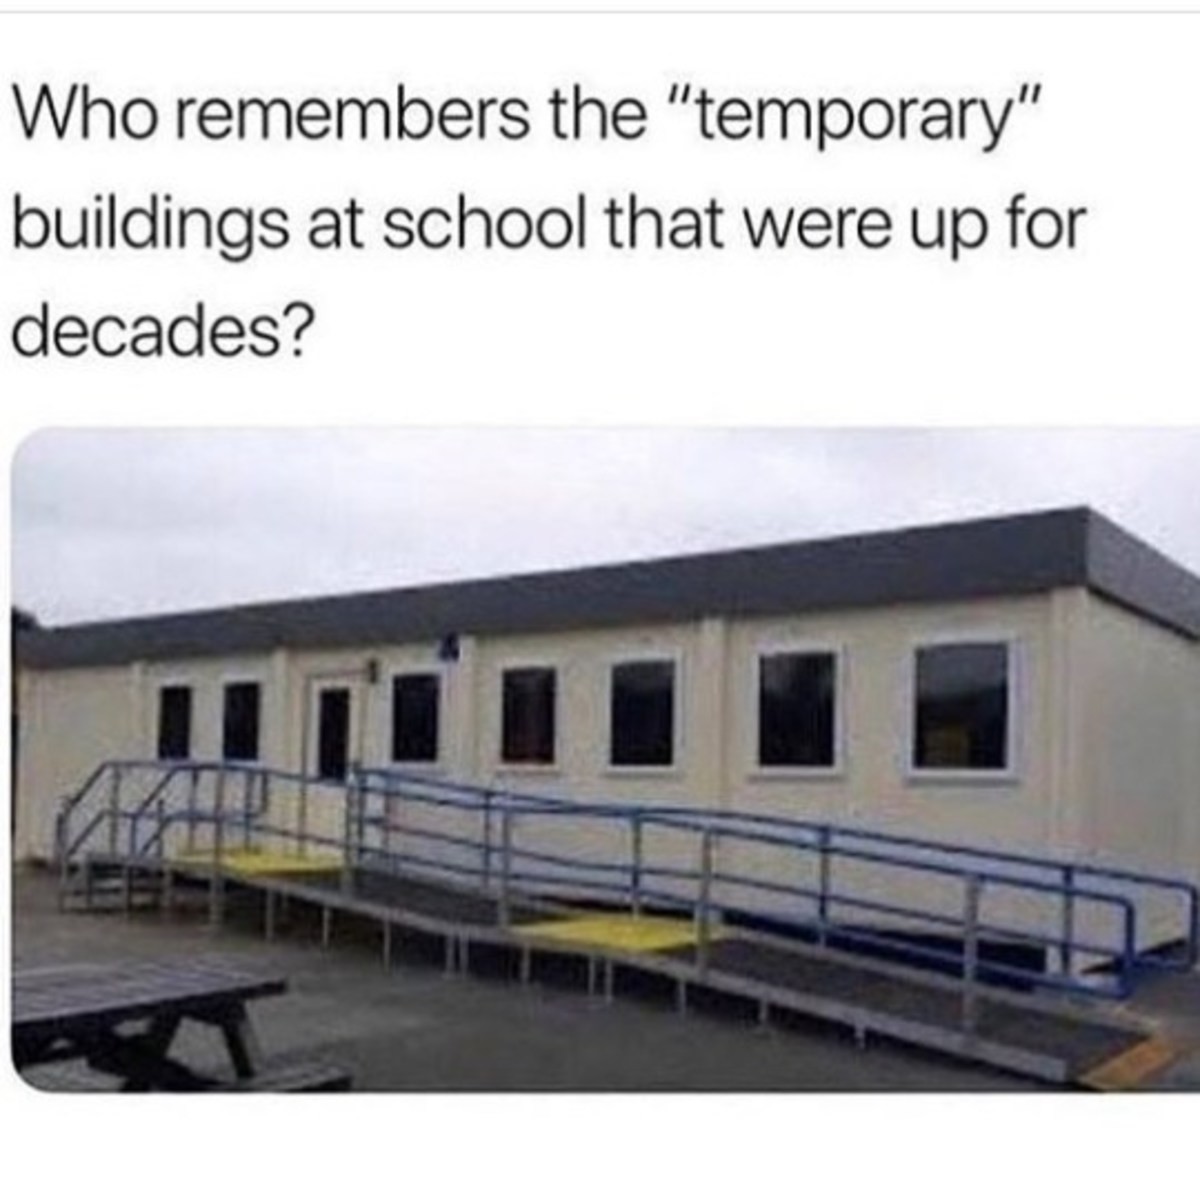 temporary school buildings - Who remembers the "temporary" buildings at school that were up for decades?